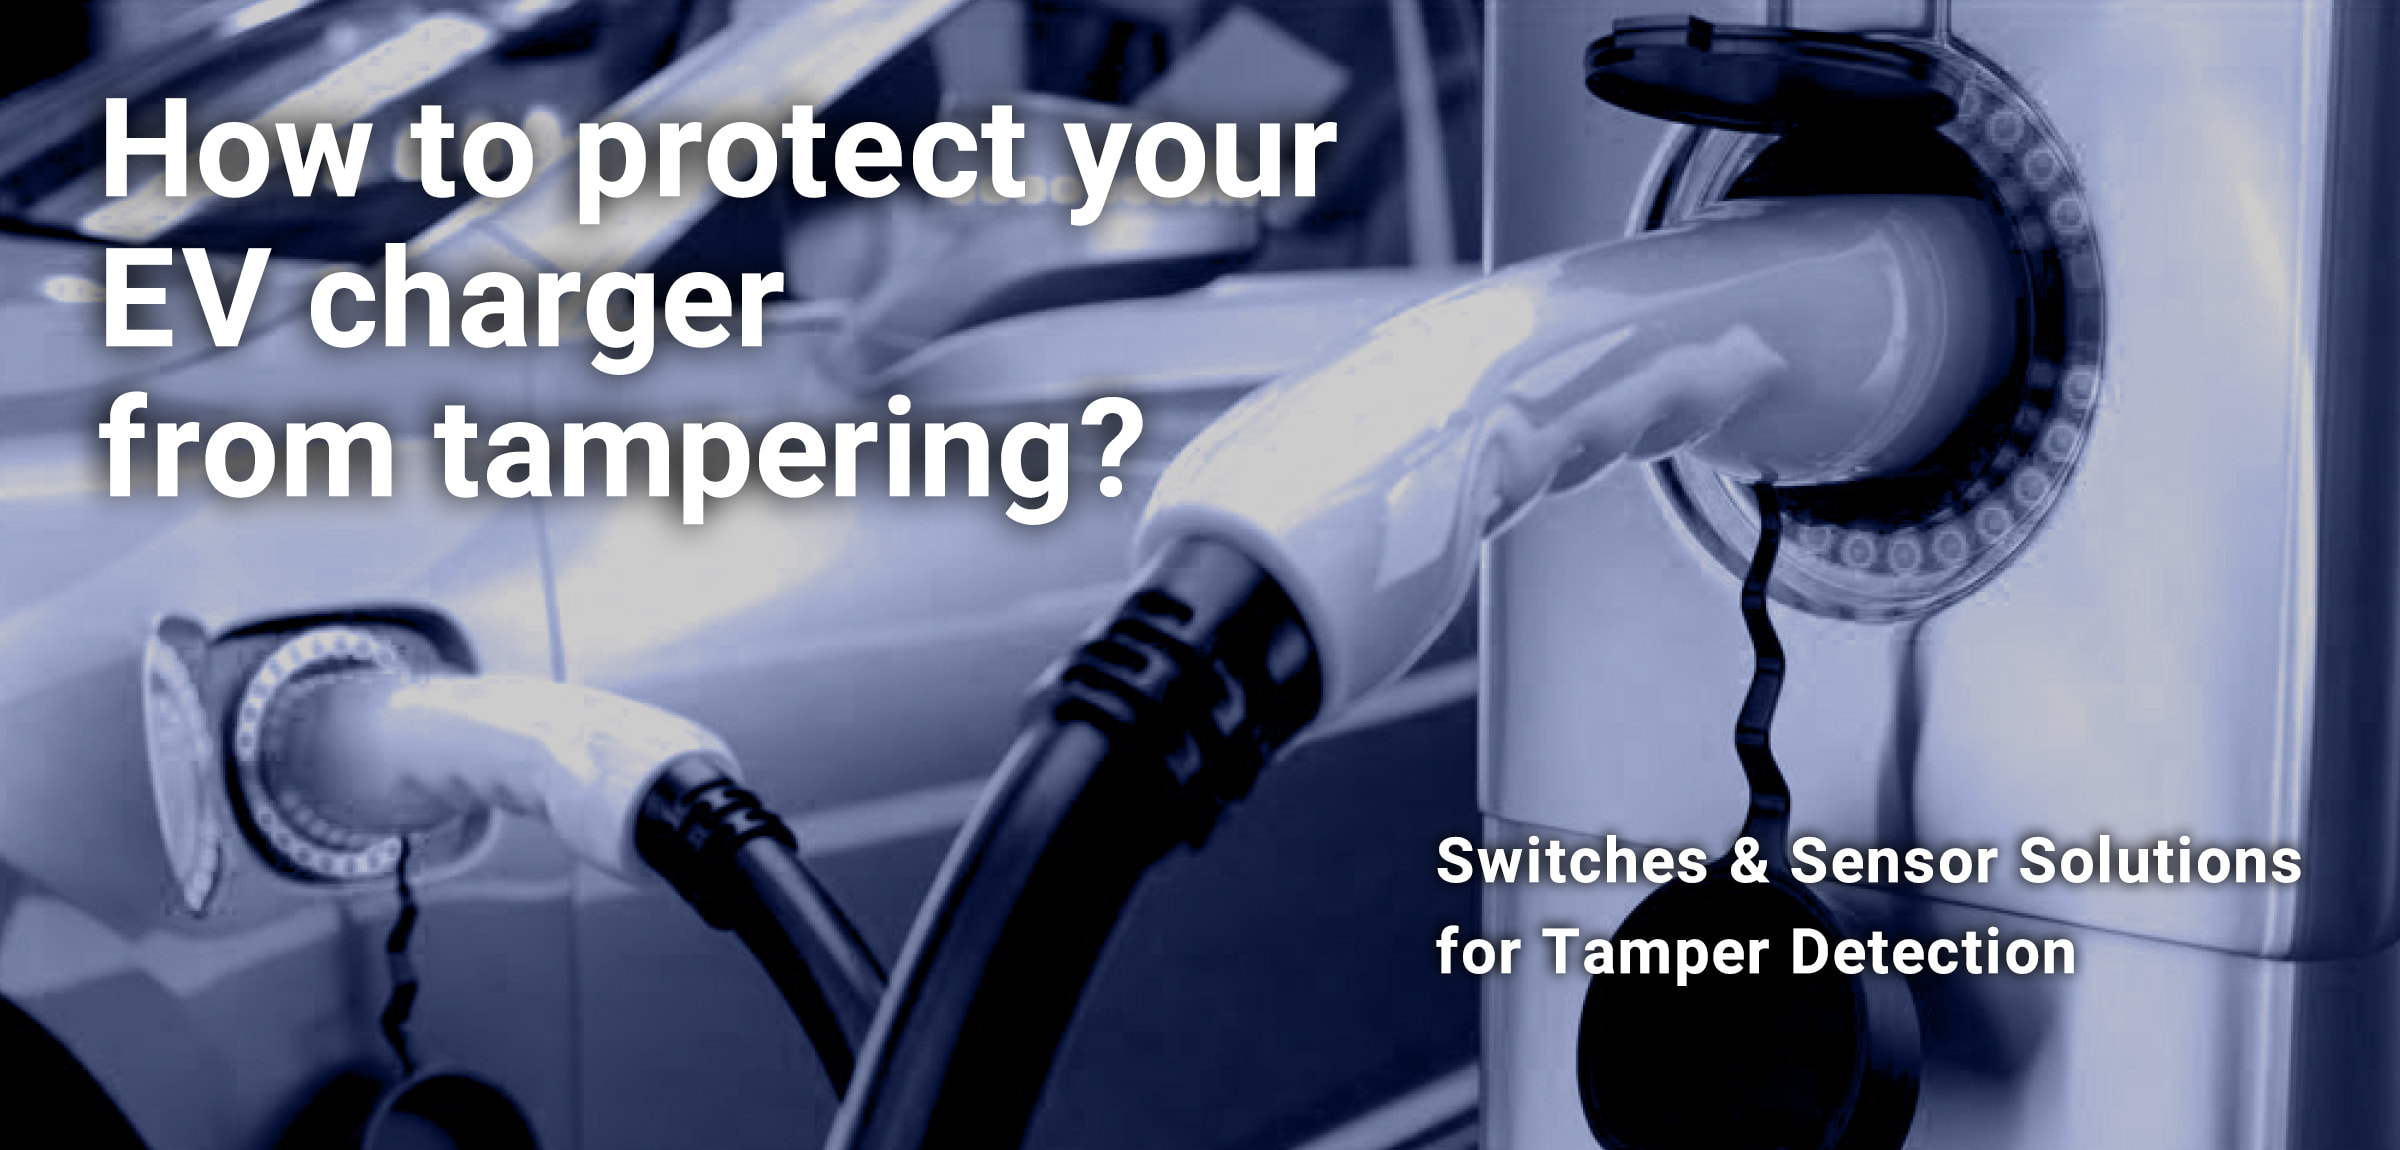 How to protect your EV charger from tampering? OMRON’s Switches & Sensor Solutions for  Electric Vehicles Power Supply Equipment (EVSE)